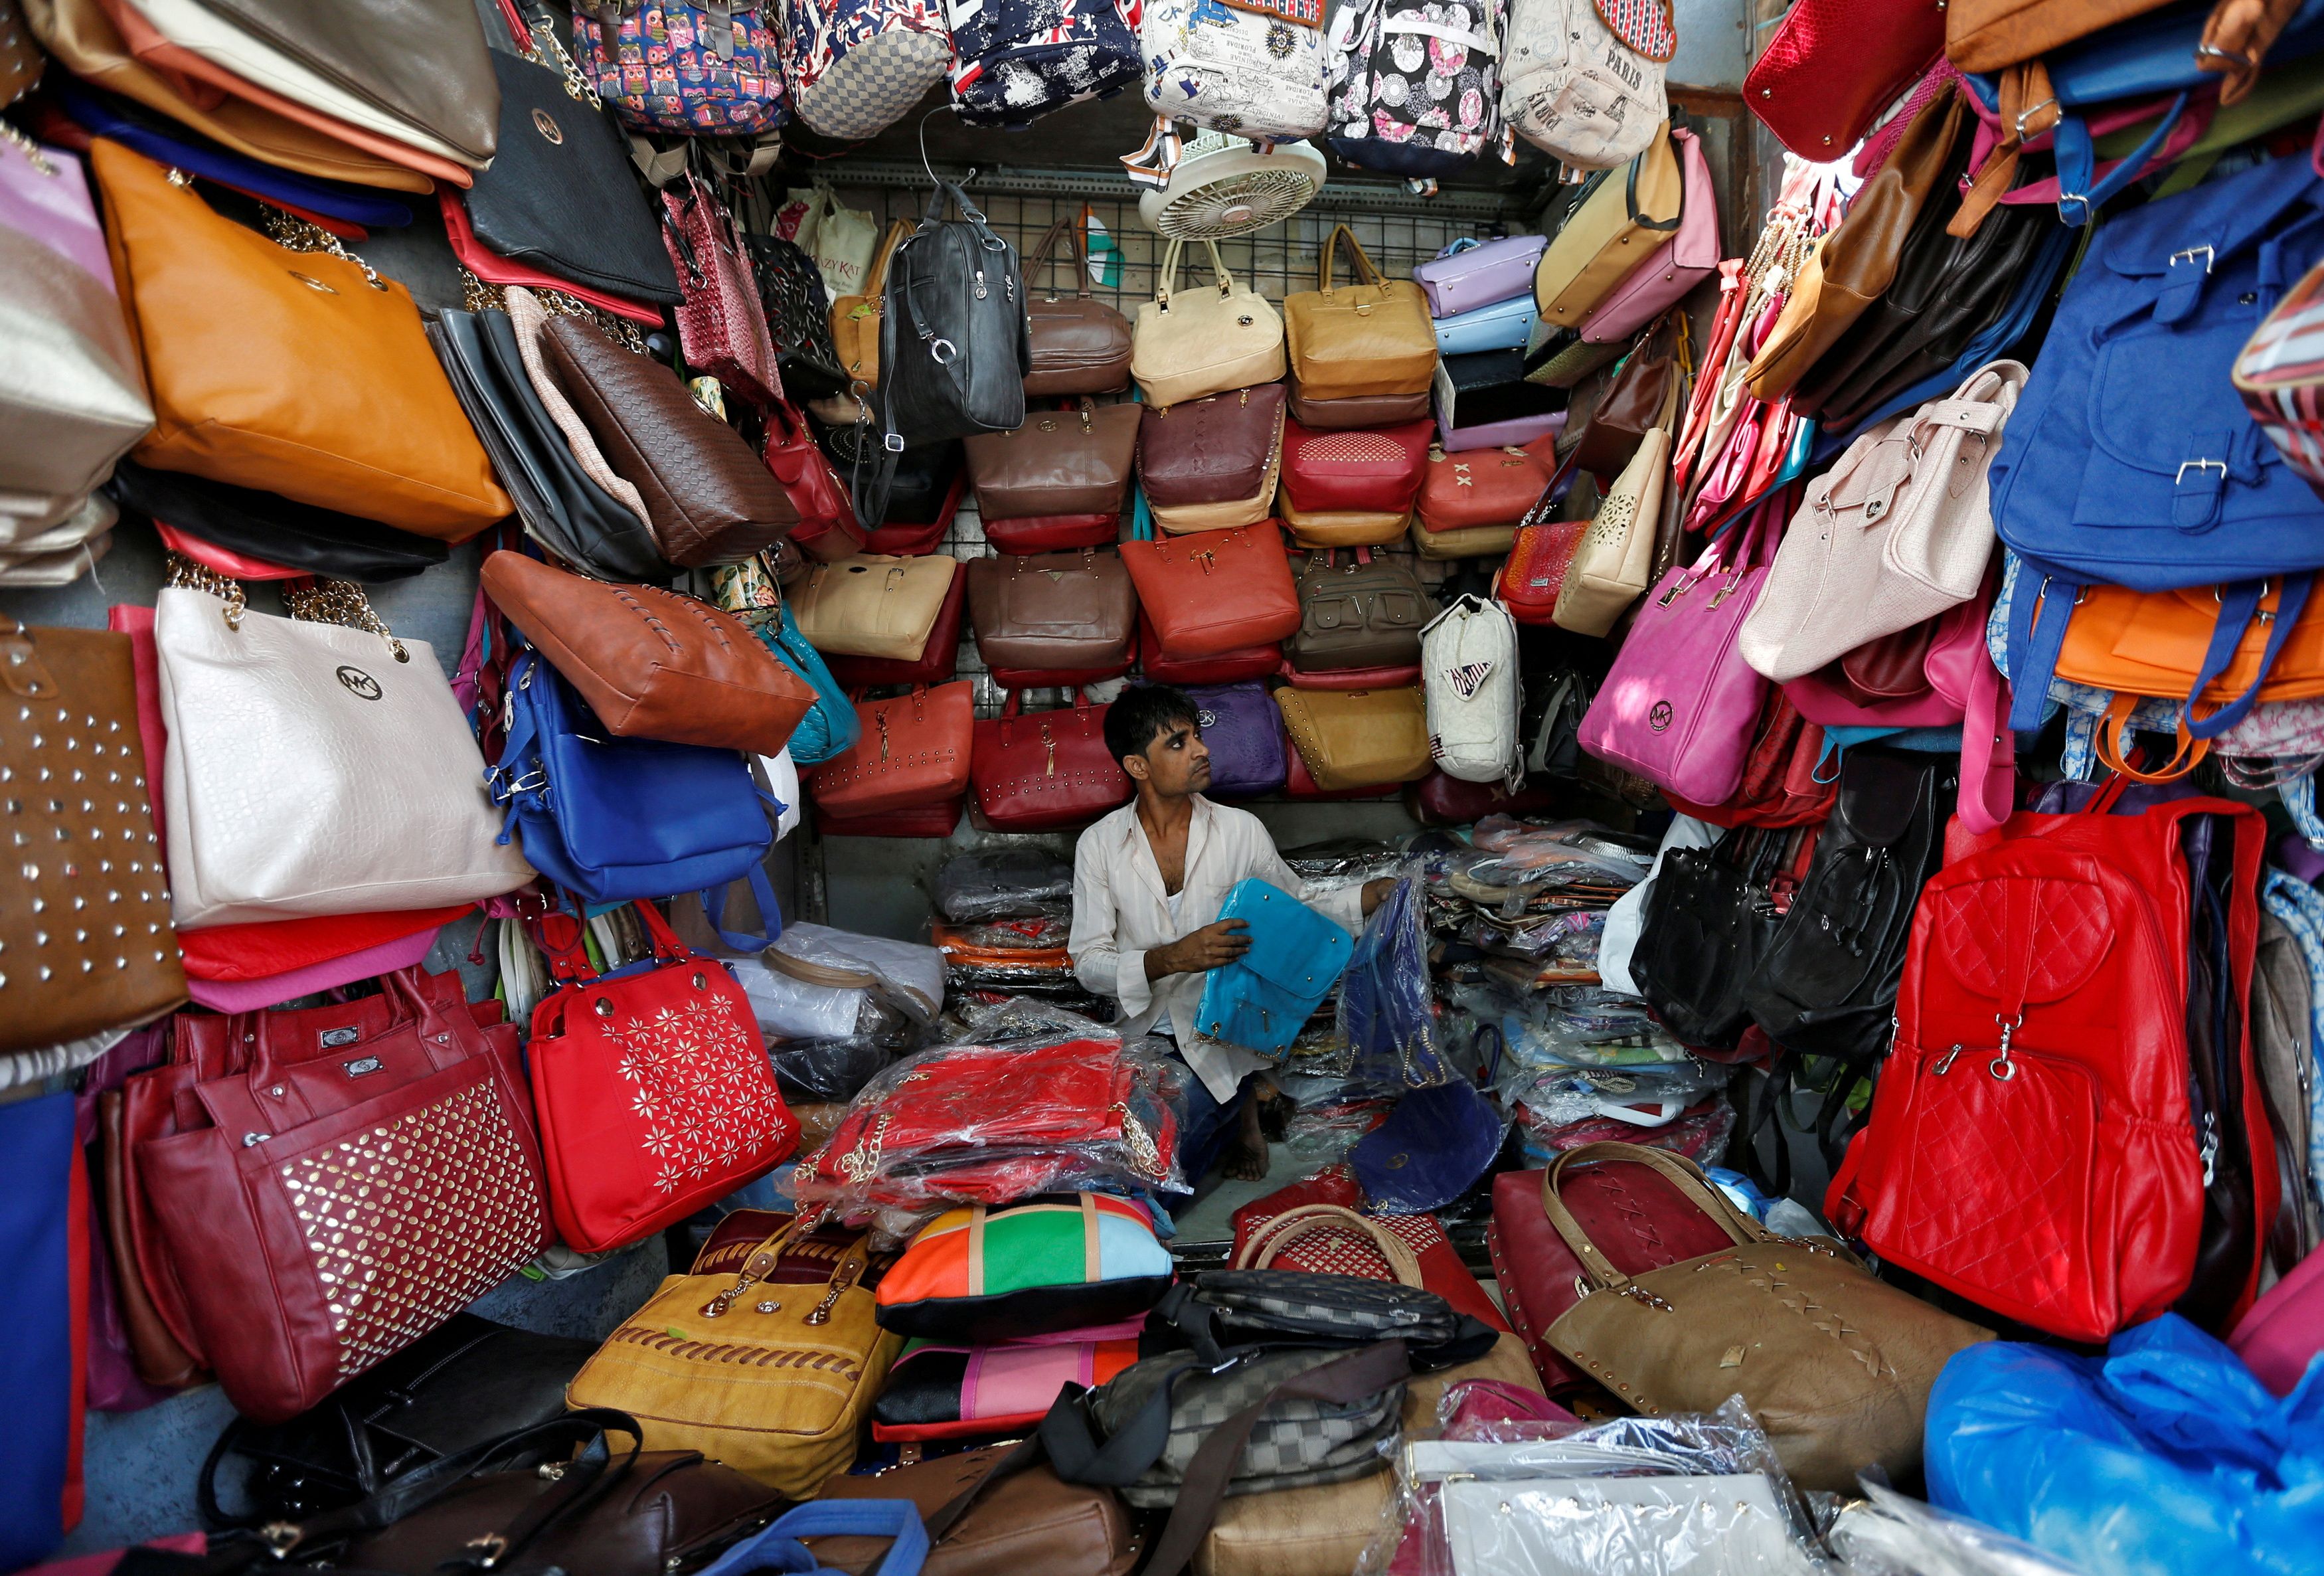 A vendor arranges bags as he waits for customers at his shop at a market in Mumbai